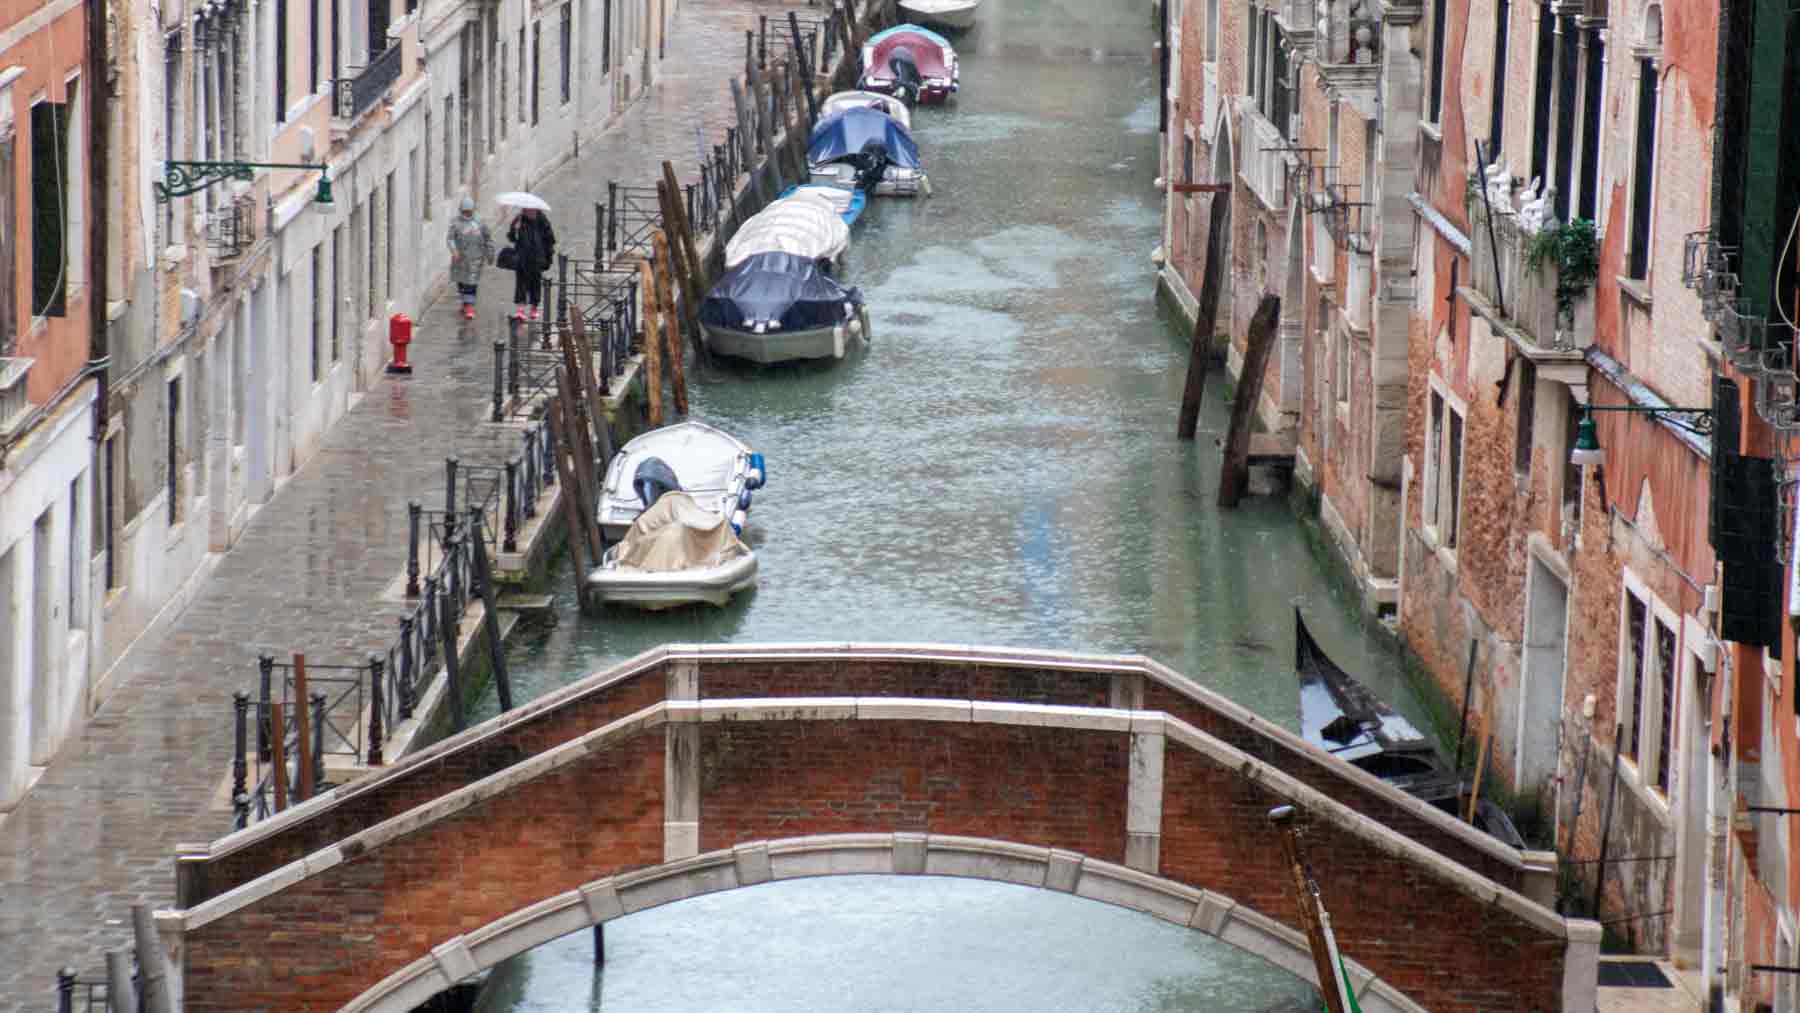 Rain on a canal in Venice, people are walking with umbrellas